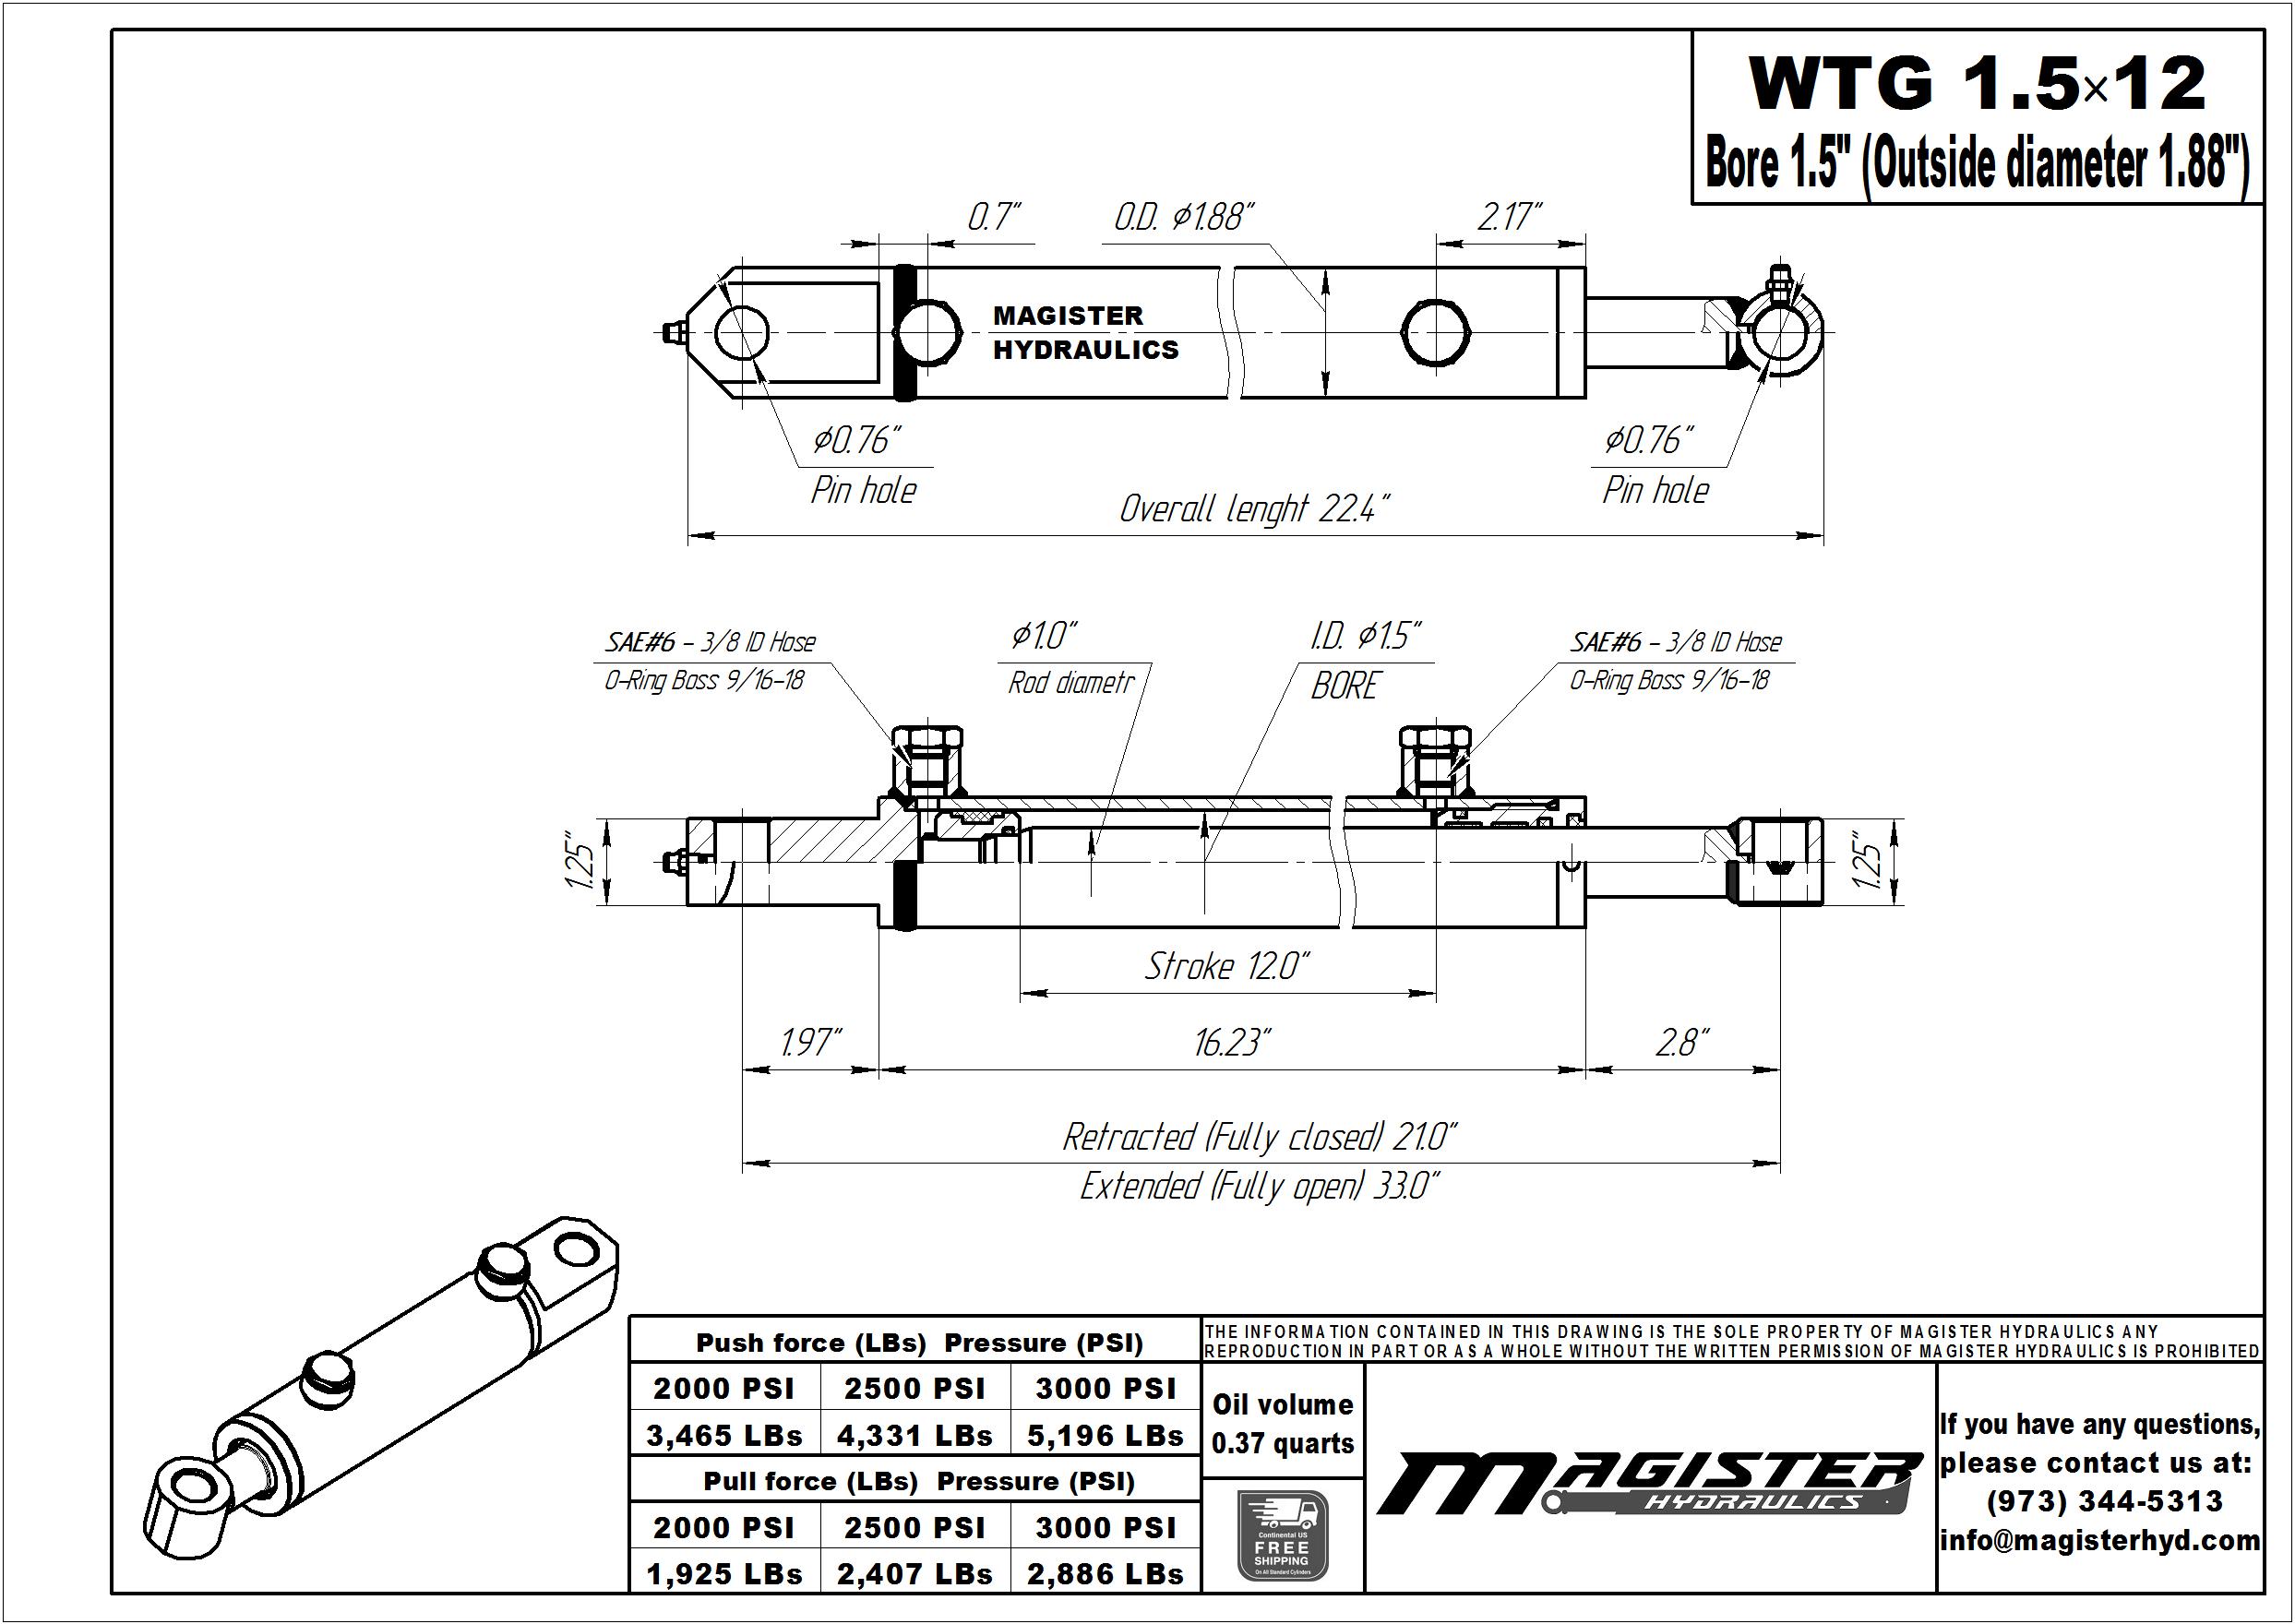 1.5 bore x 12 stroke hydraulic cylinder, welded tang double acting cylinder | Magister Hydraulics